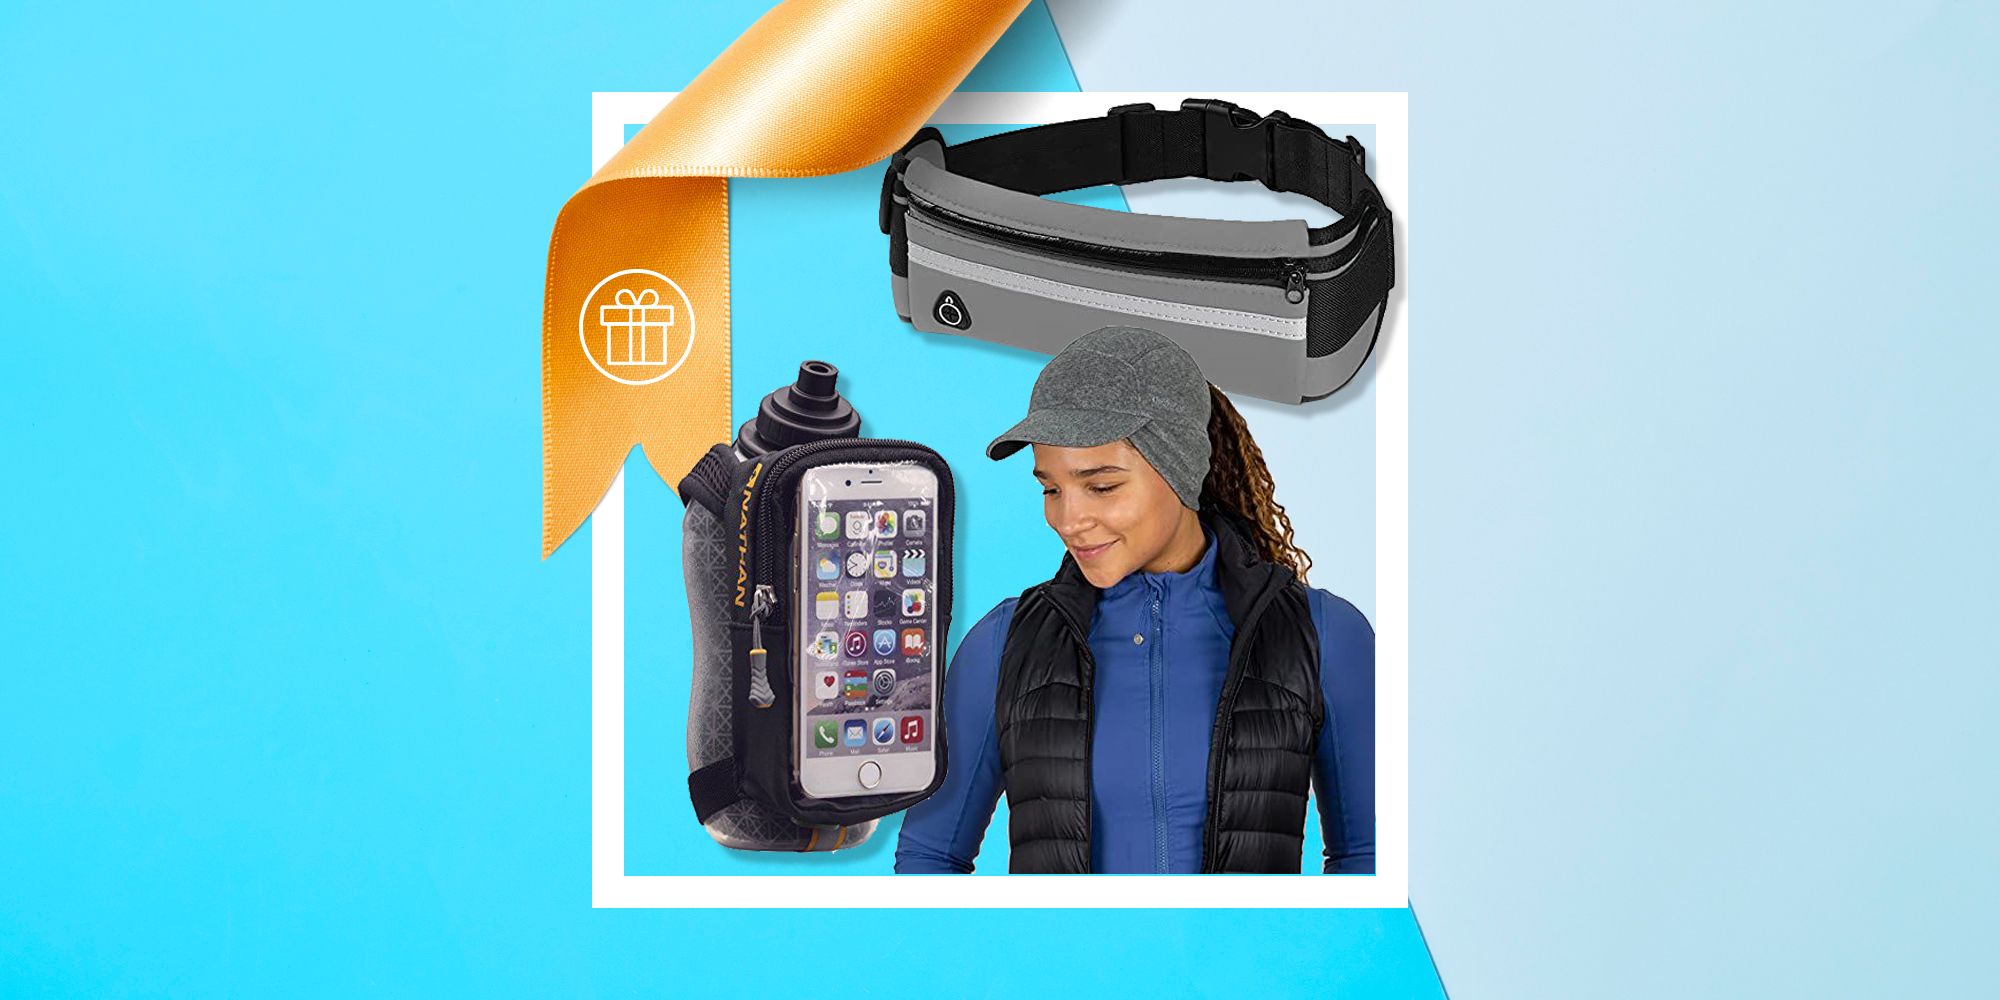 28 Cheap Gifts for Runners in 2023 - Best Running Gifts Under $30